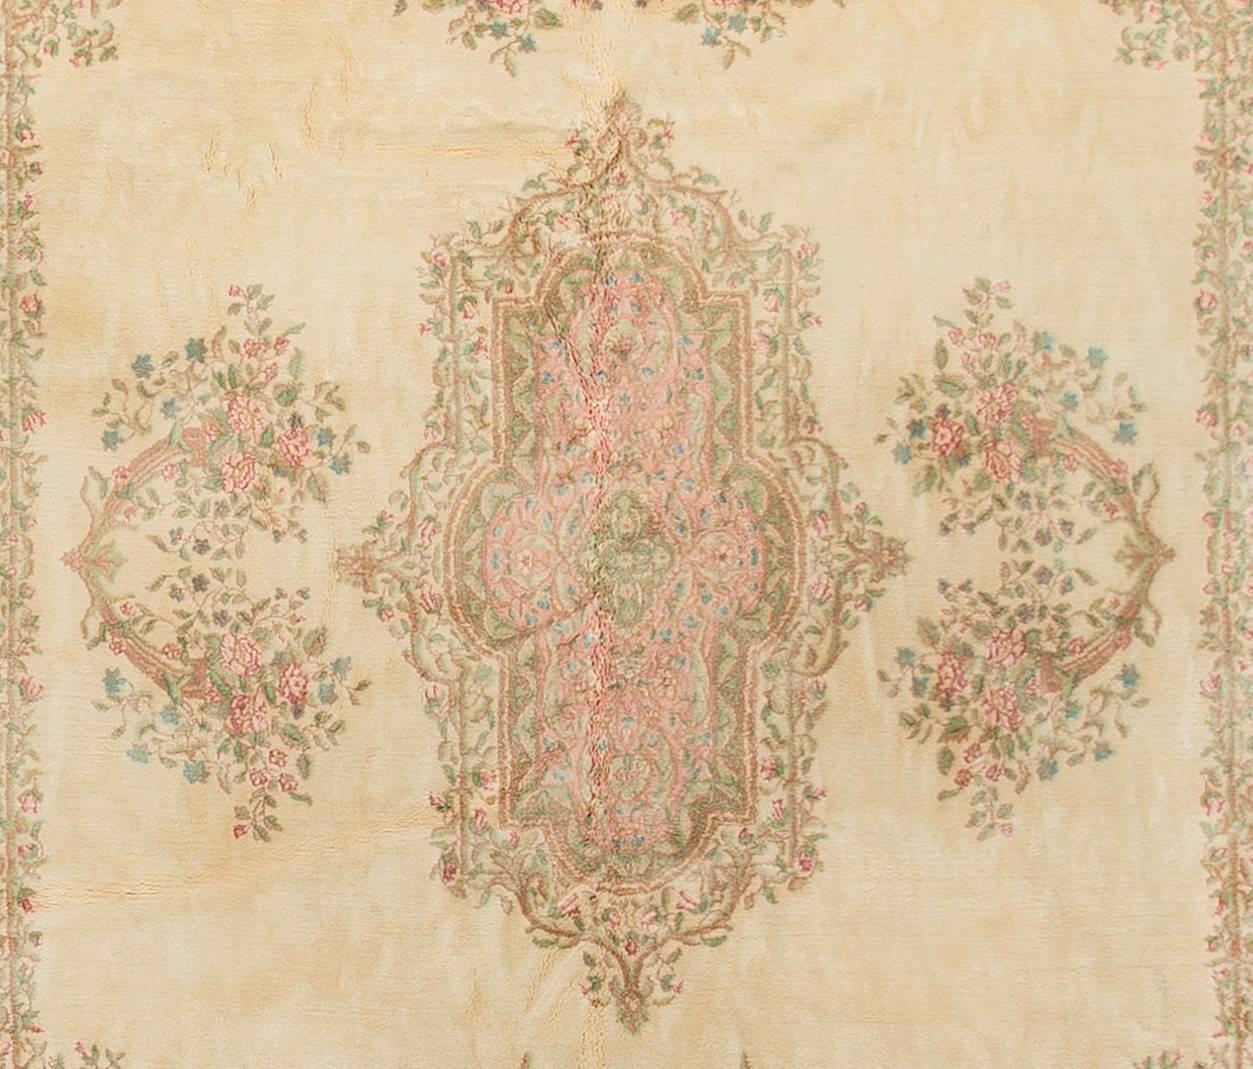 The color combination of ivory and peach works so well on this lovely light and airy rug. The corner spandrels reflect the inner grounds motifs and all finished off so splendidly by the main border.Size:11'5 x 18'5